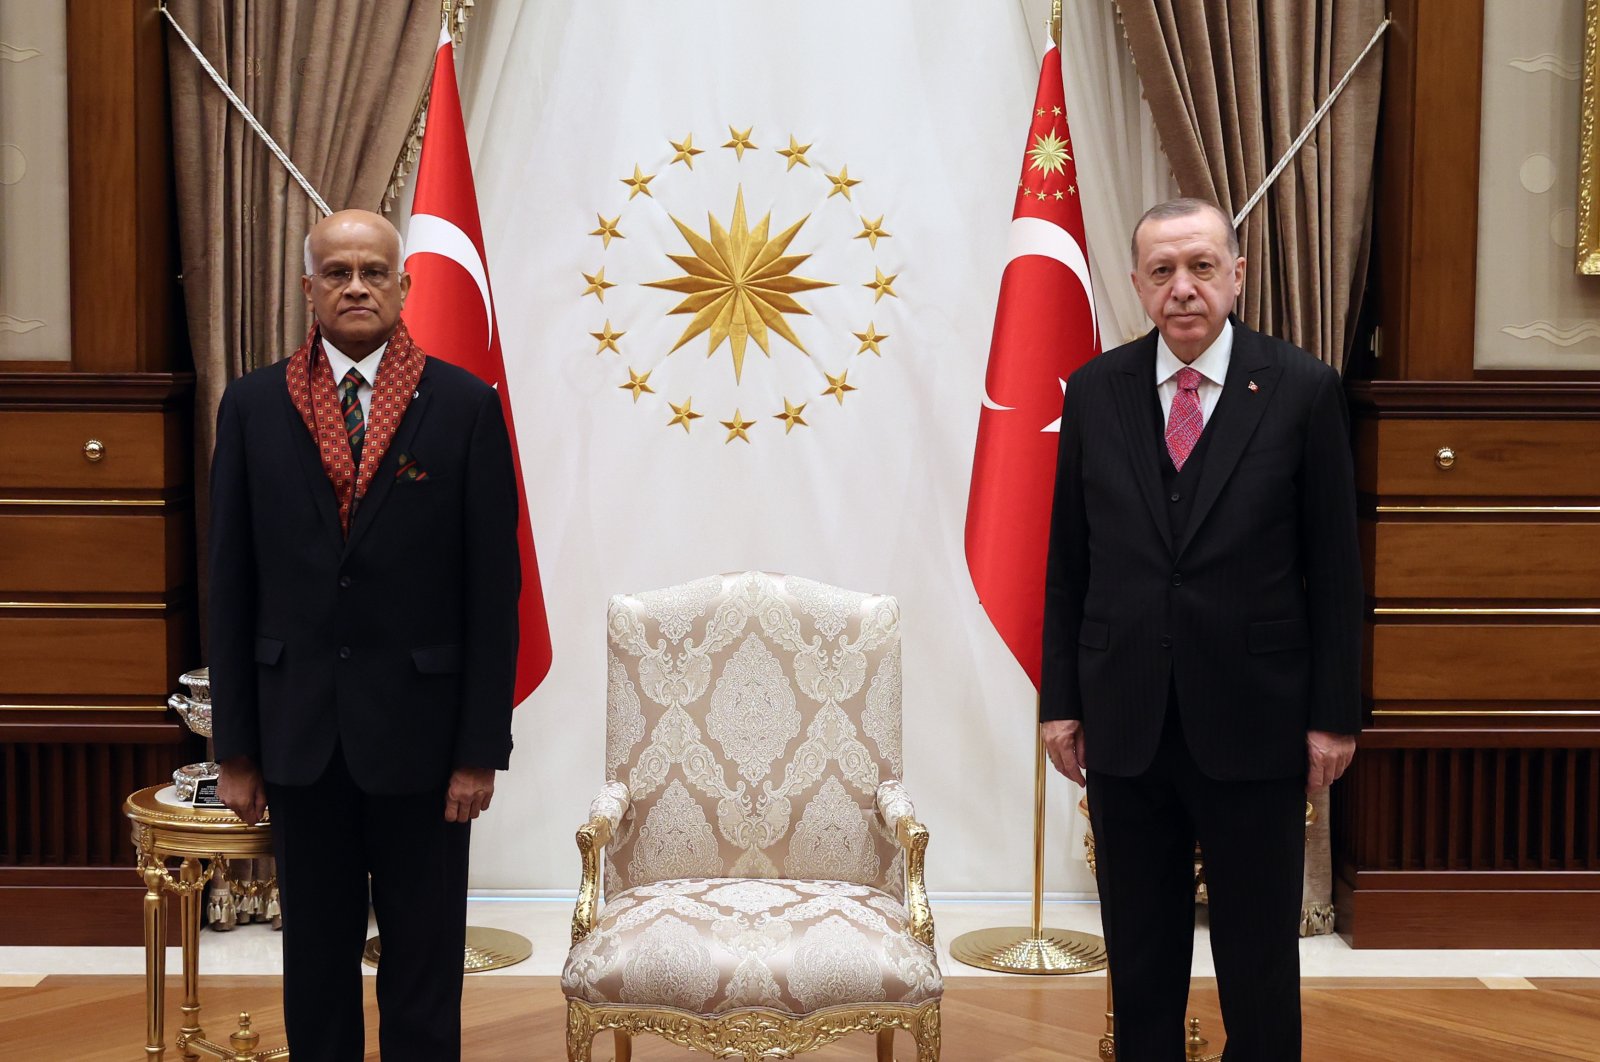 President Recep Tayyip Erdoğan poses with Bangladesh's Ambassador Mosud Mannan after the latter submits his letter of credence in the capital Ankara, Turkey, Oct. 22, 2020. (AA File Photo)